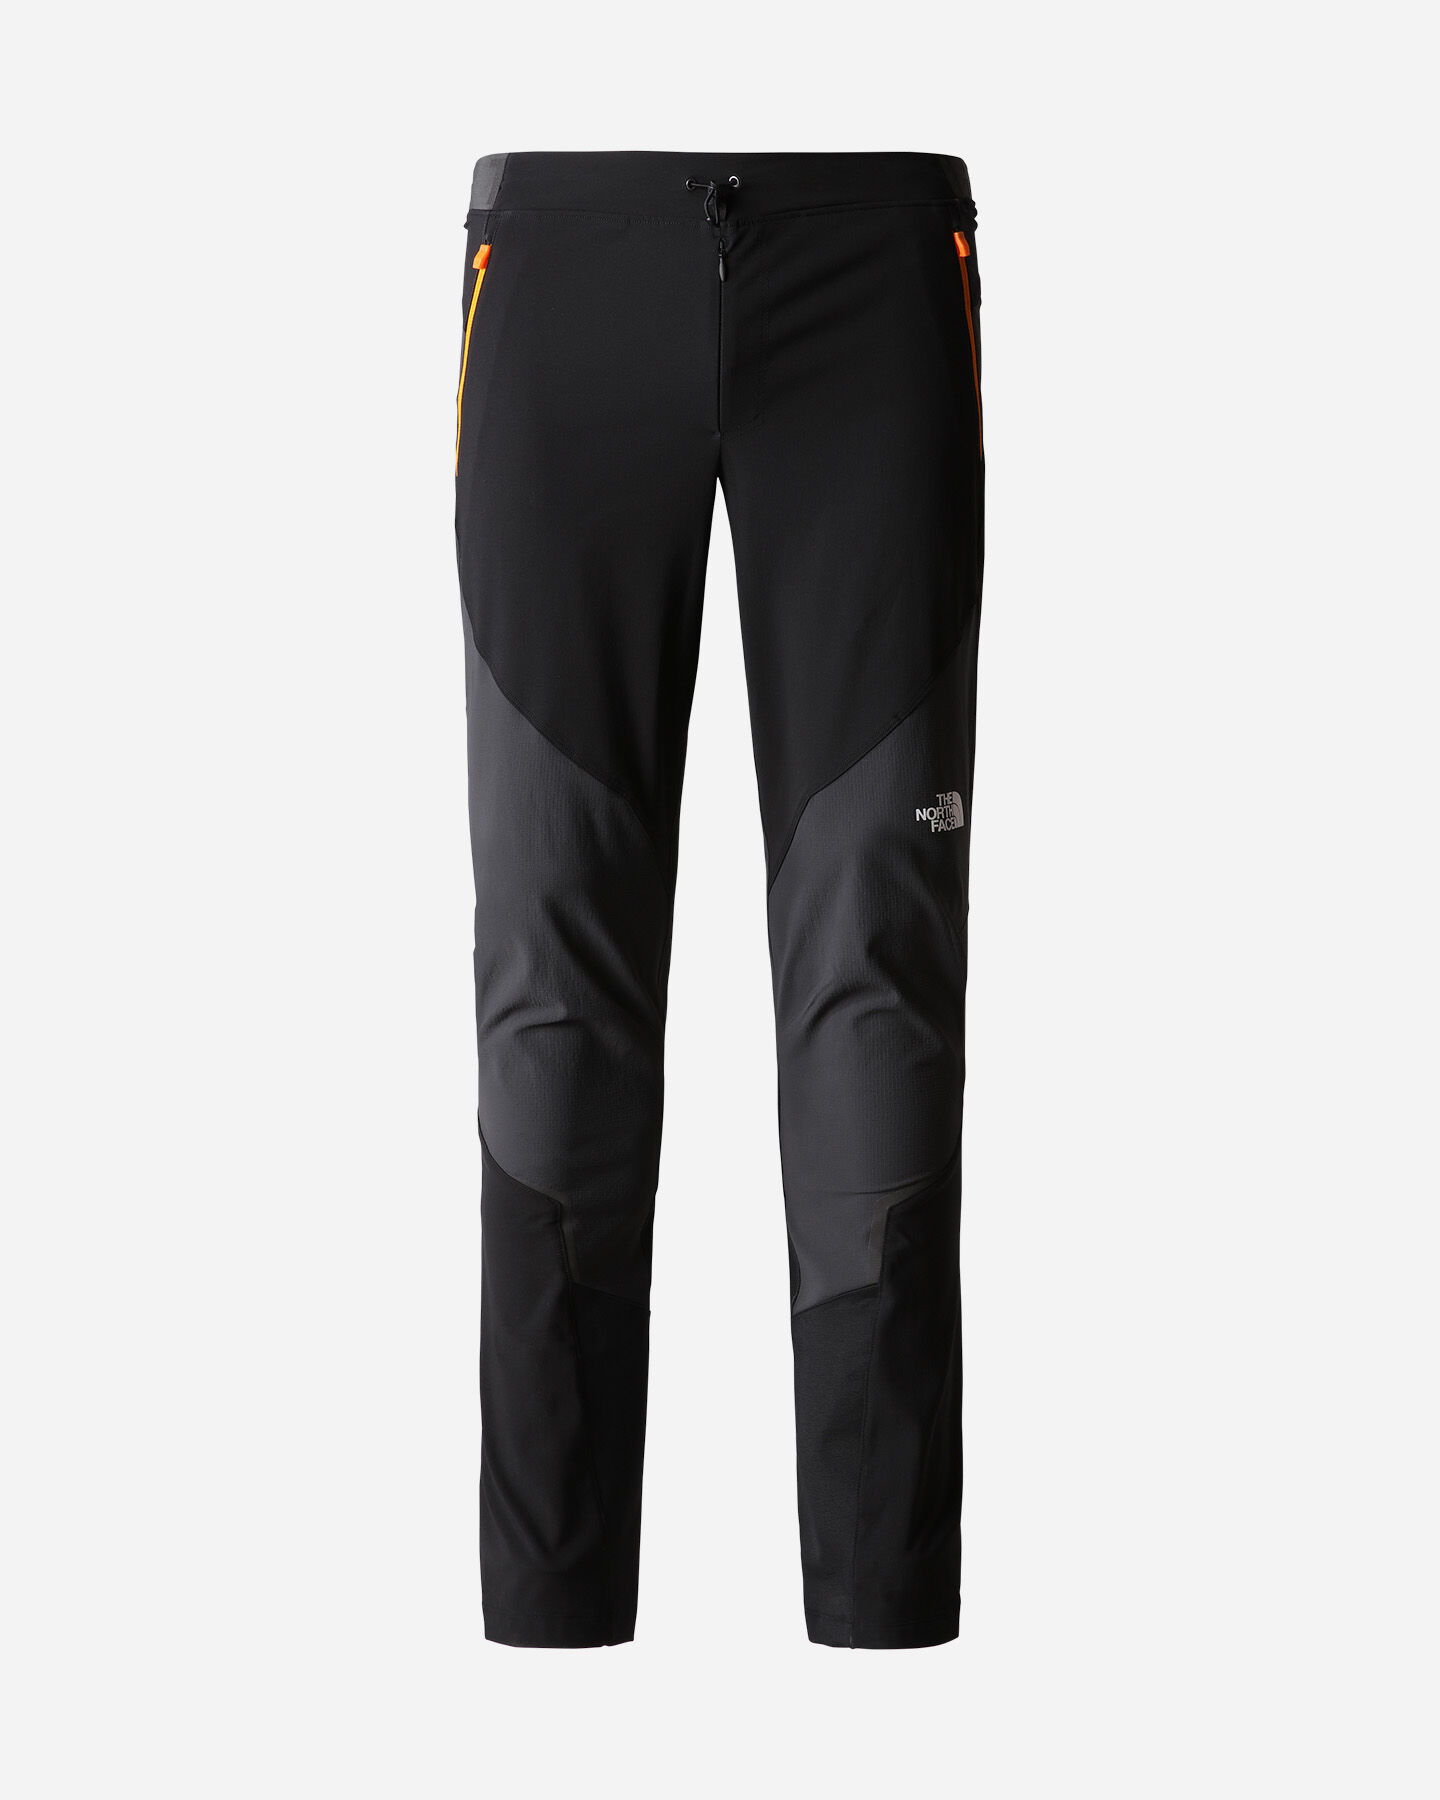  Pantalone outdoor THE NORTH FACE DAWN TURN M S5476172|902|REG28 scatto 0